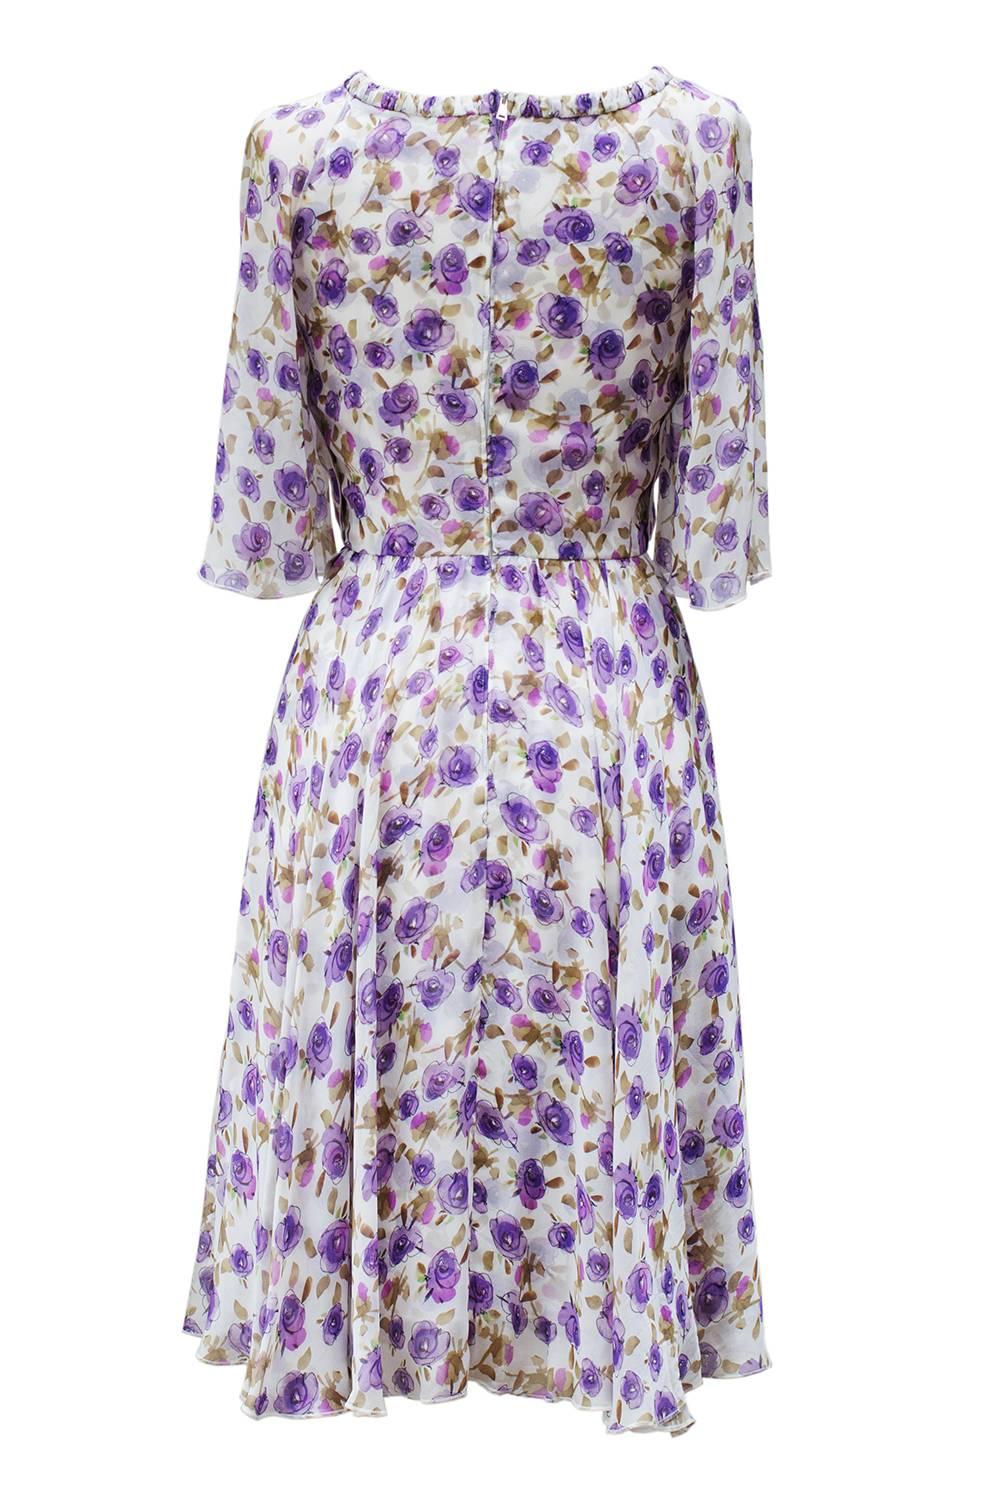 2000's Dolce&Gabbana Purple Flower Printed Summer Dress. Divine light summer dress in muslin printed of beautiful purple roses with three quarters sleeves. when you move the skirt is dancing around you .
The 3/4 sleeves are like two wings .